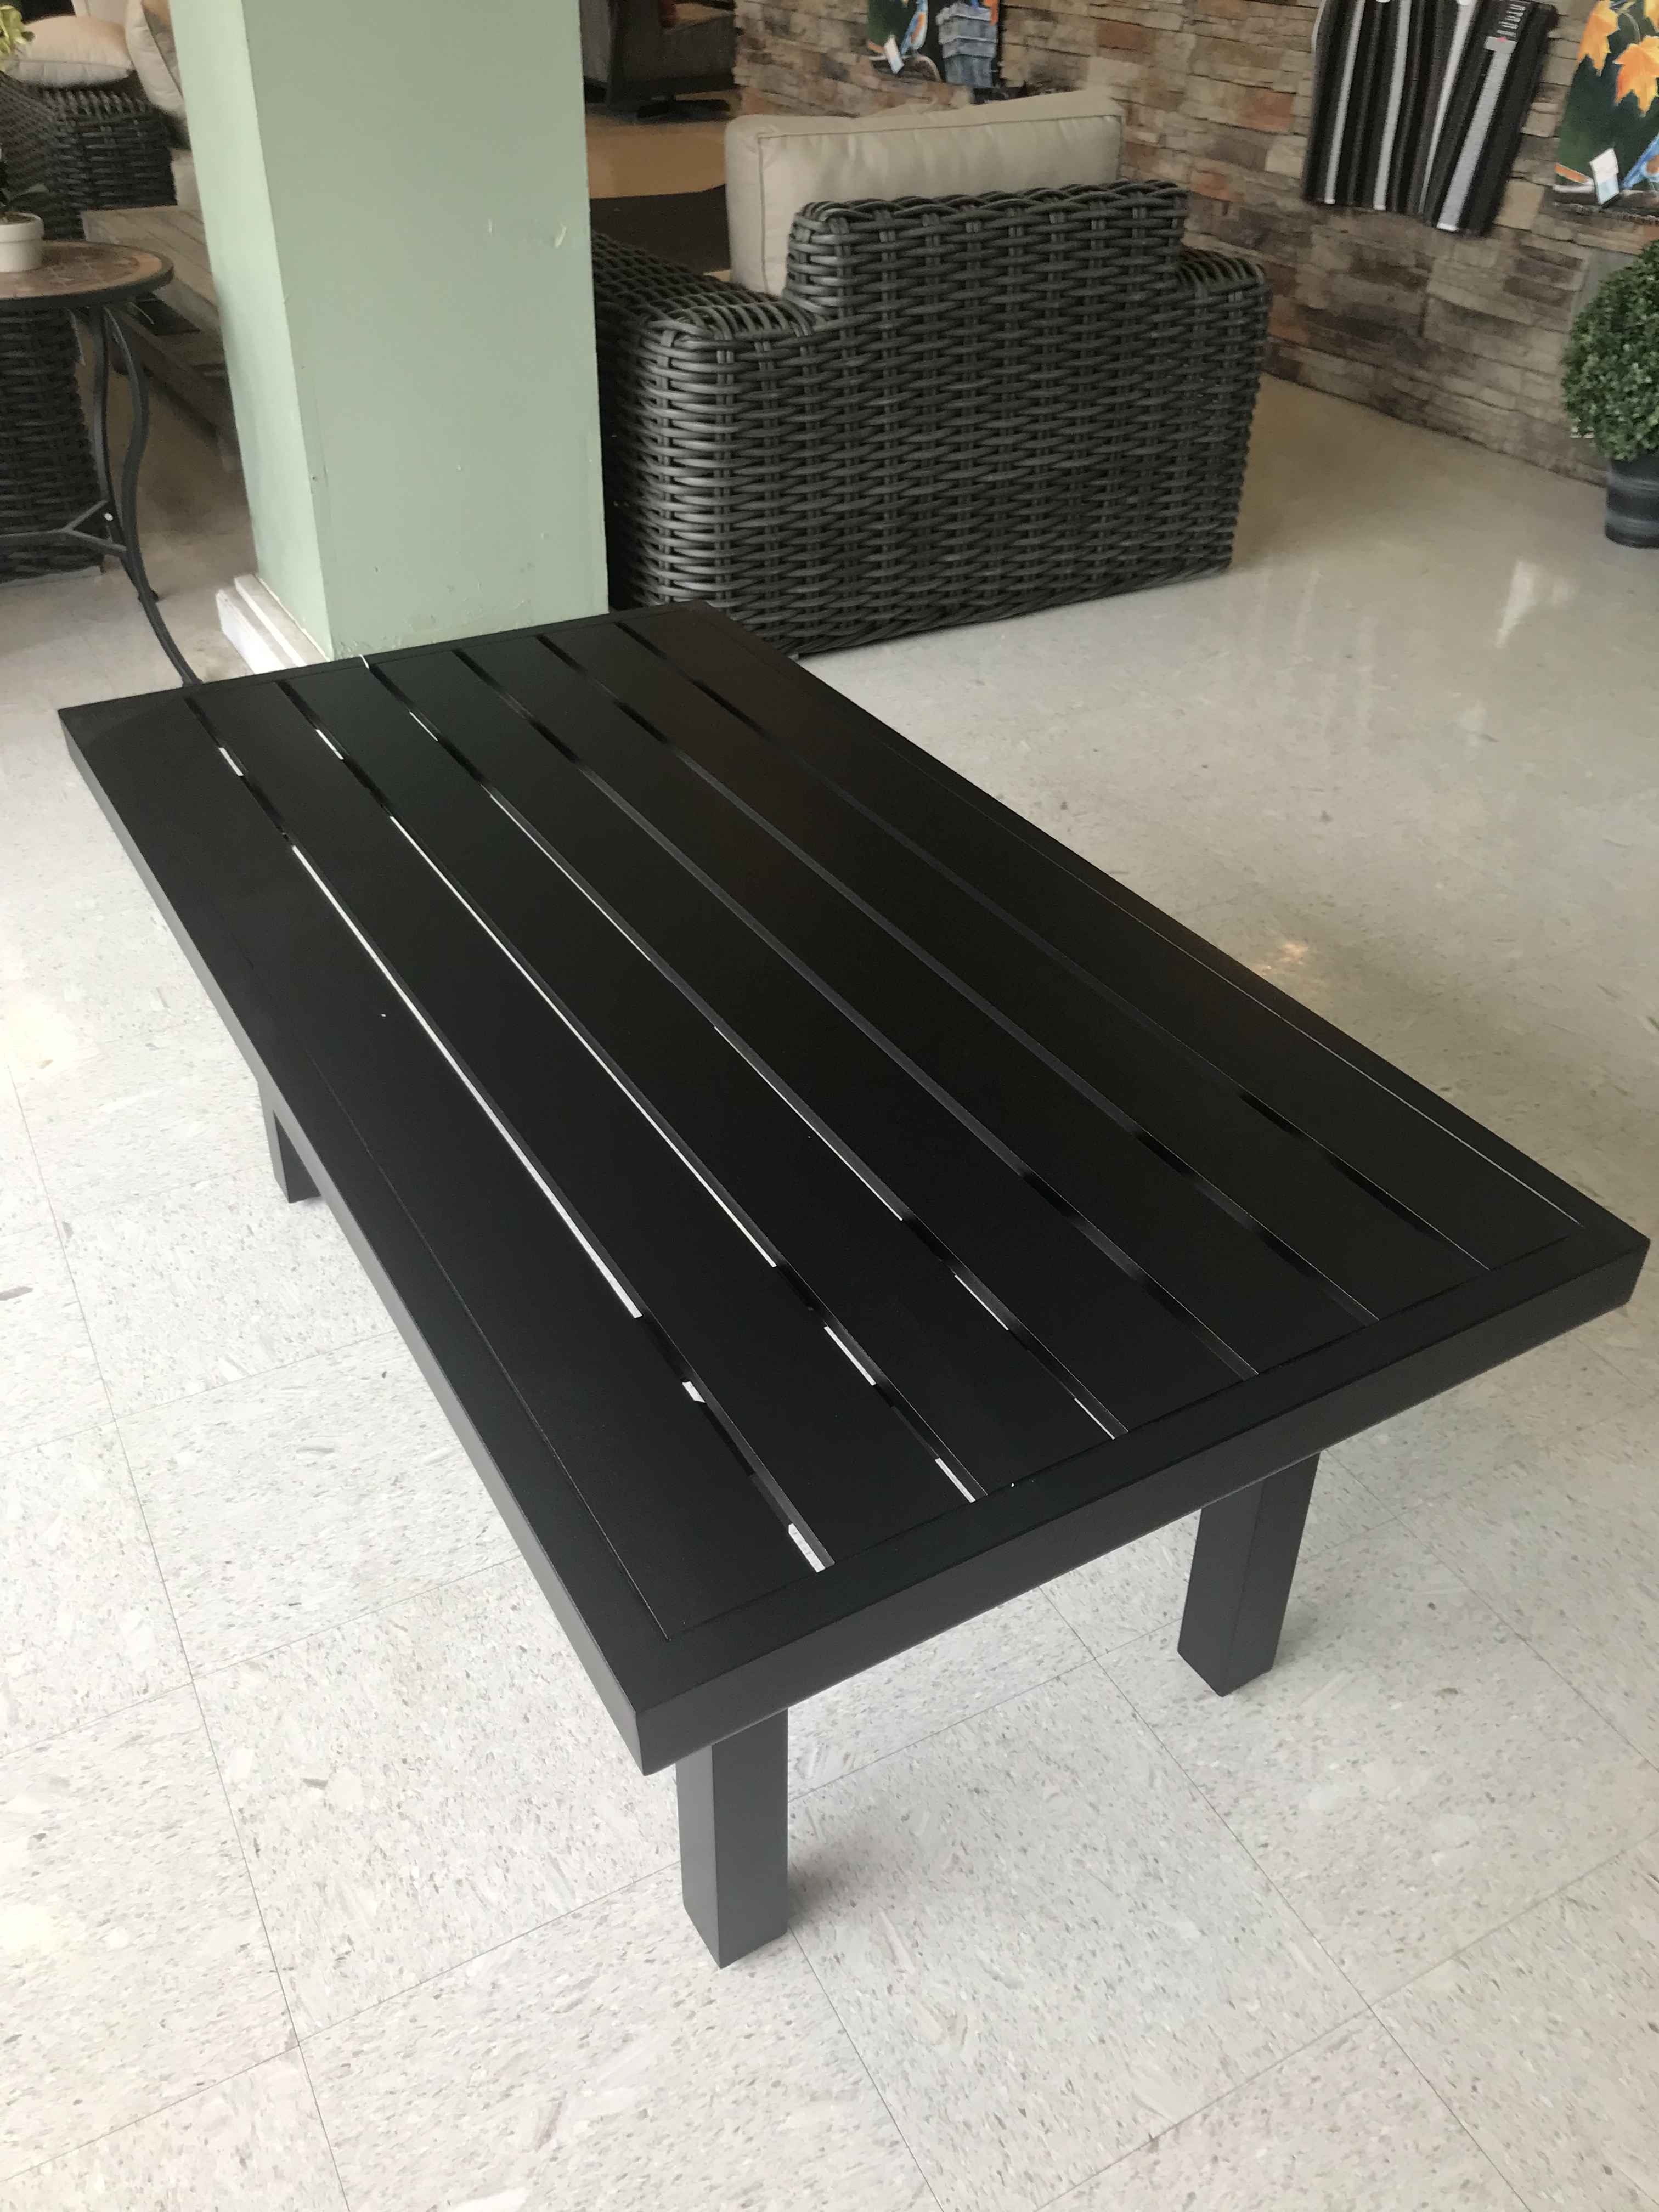 48 inch x 26 inch trinidad slatted coffee table – black product image